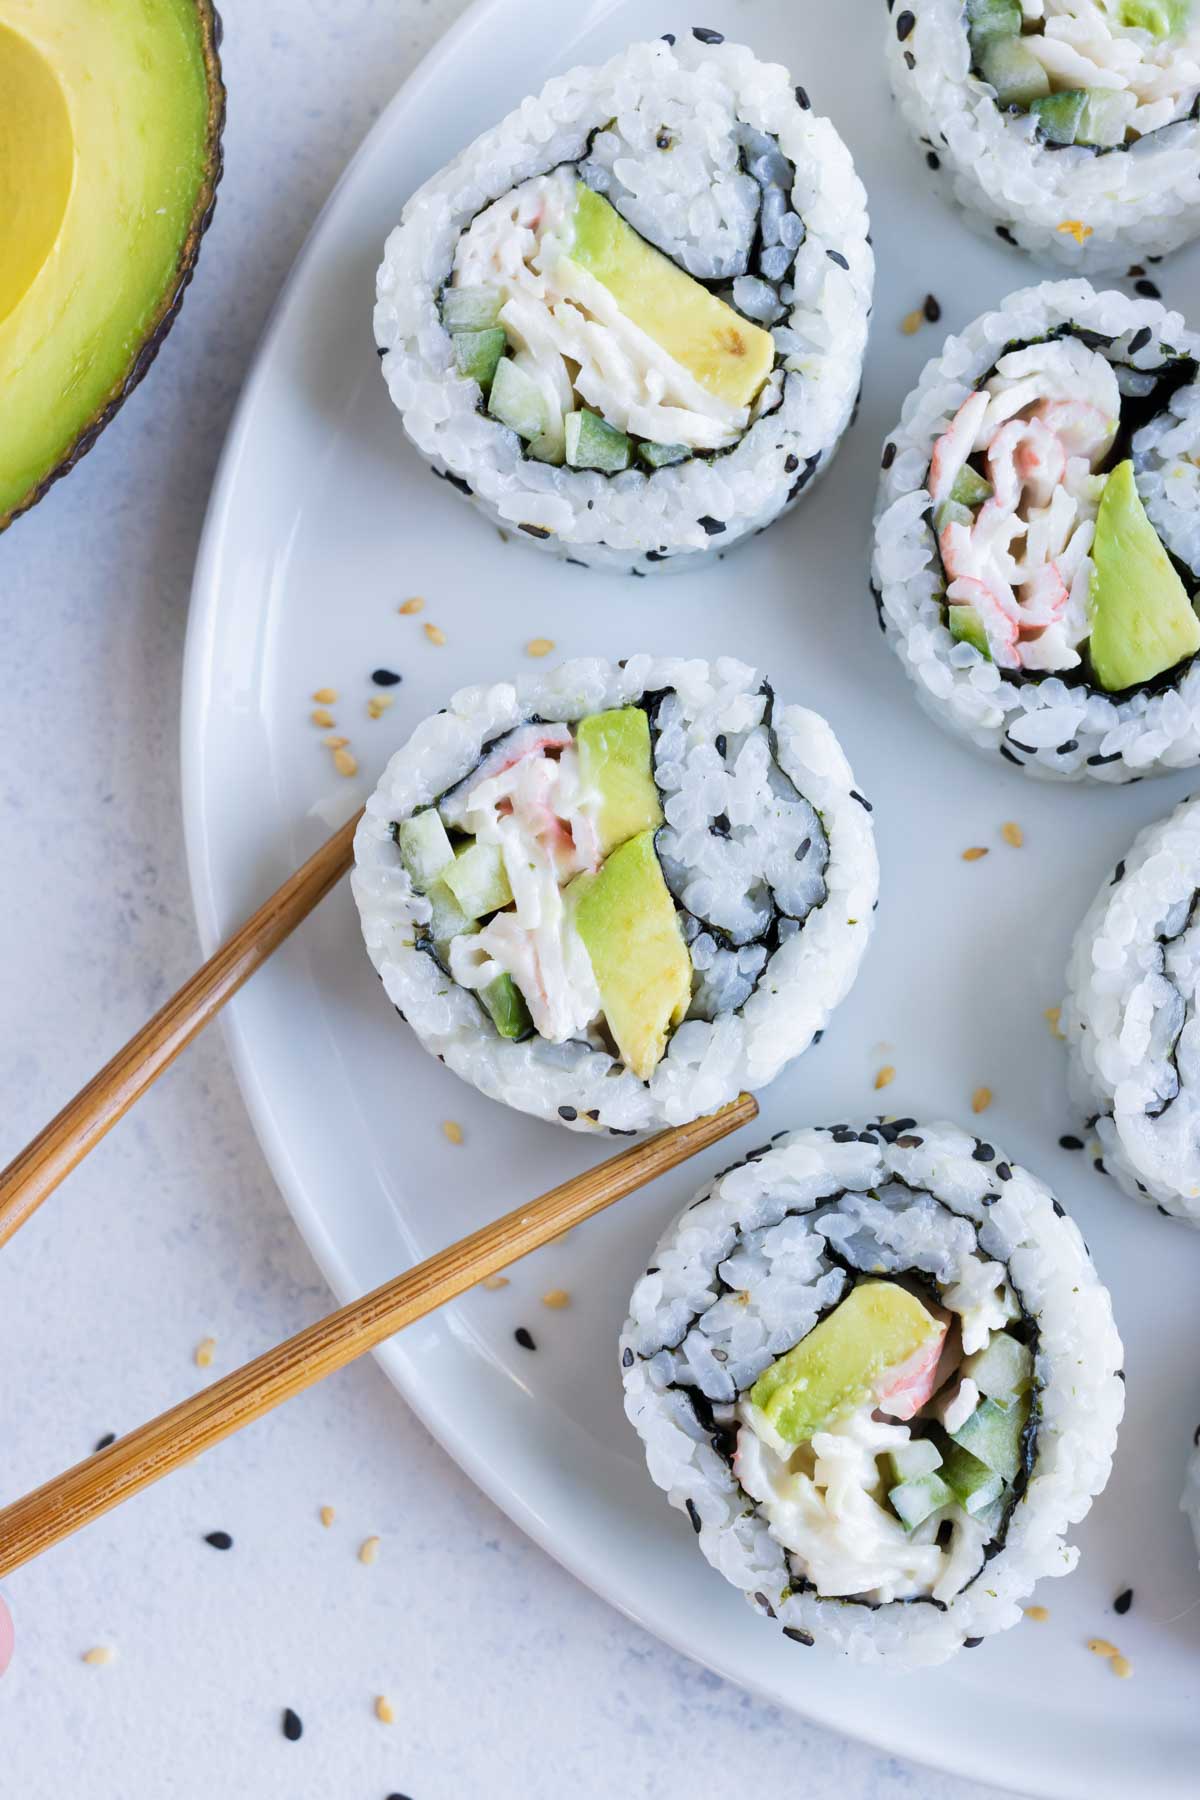 16 Different Sushi Recipes - Enjoy! - The Foreign Fork